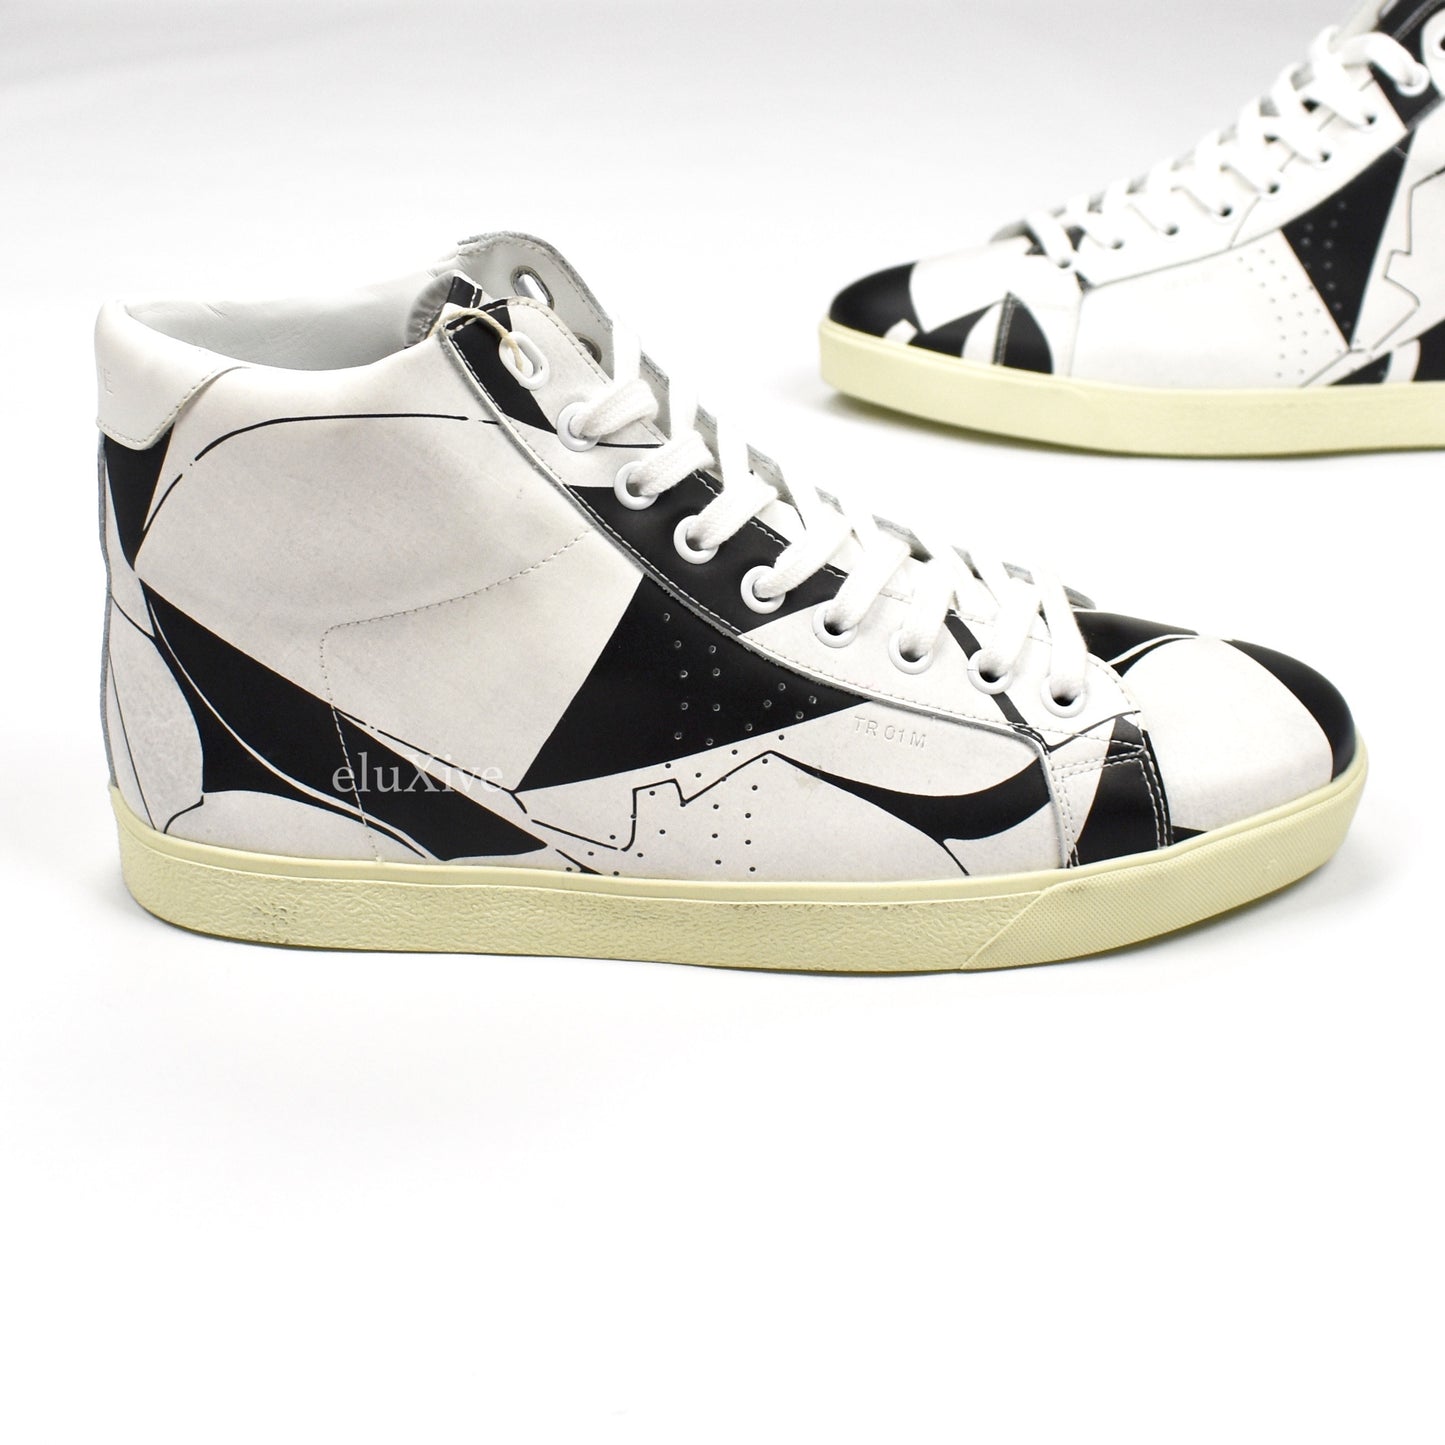 Celine - Abstract Print TR 01M Sneakers